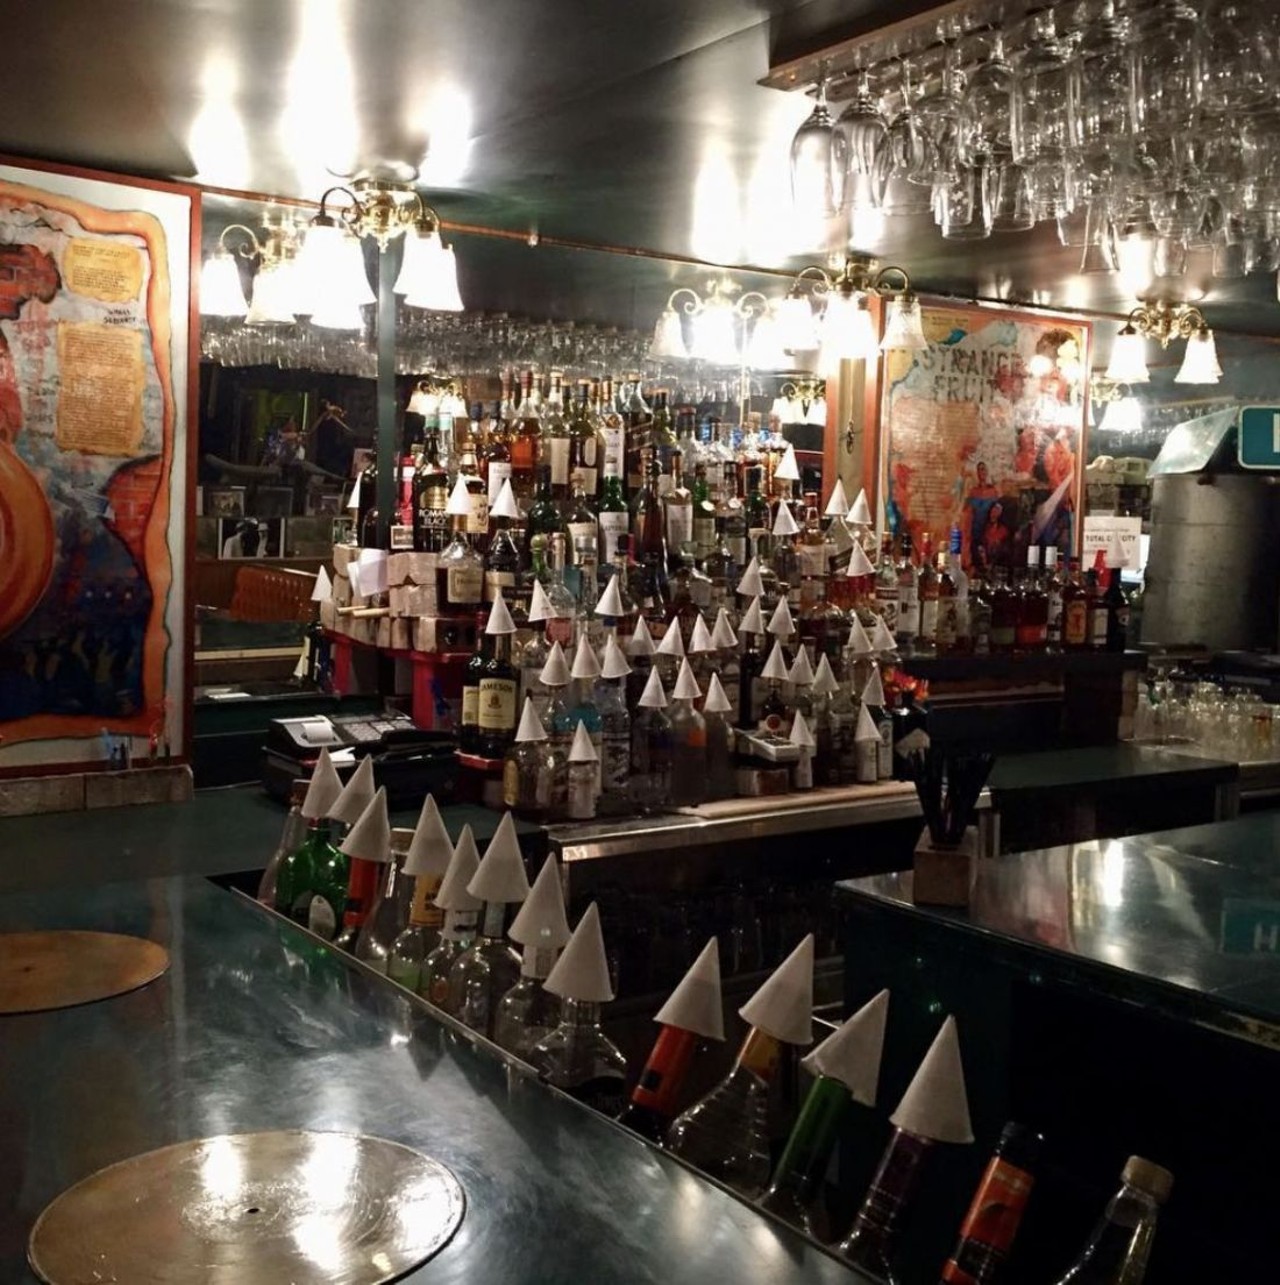 Cafe D&#146;Mongos
1439 Griswold St, Detroit, MI 48226
If you want to hear a good story, head to this eclectic downtown bar that is decorated in local Detroit history.
Photo courtesy of @cafedmongo